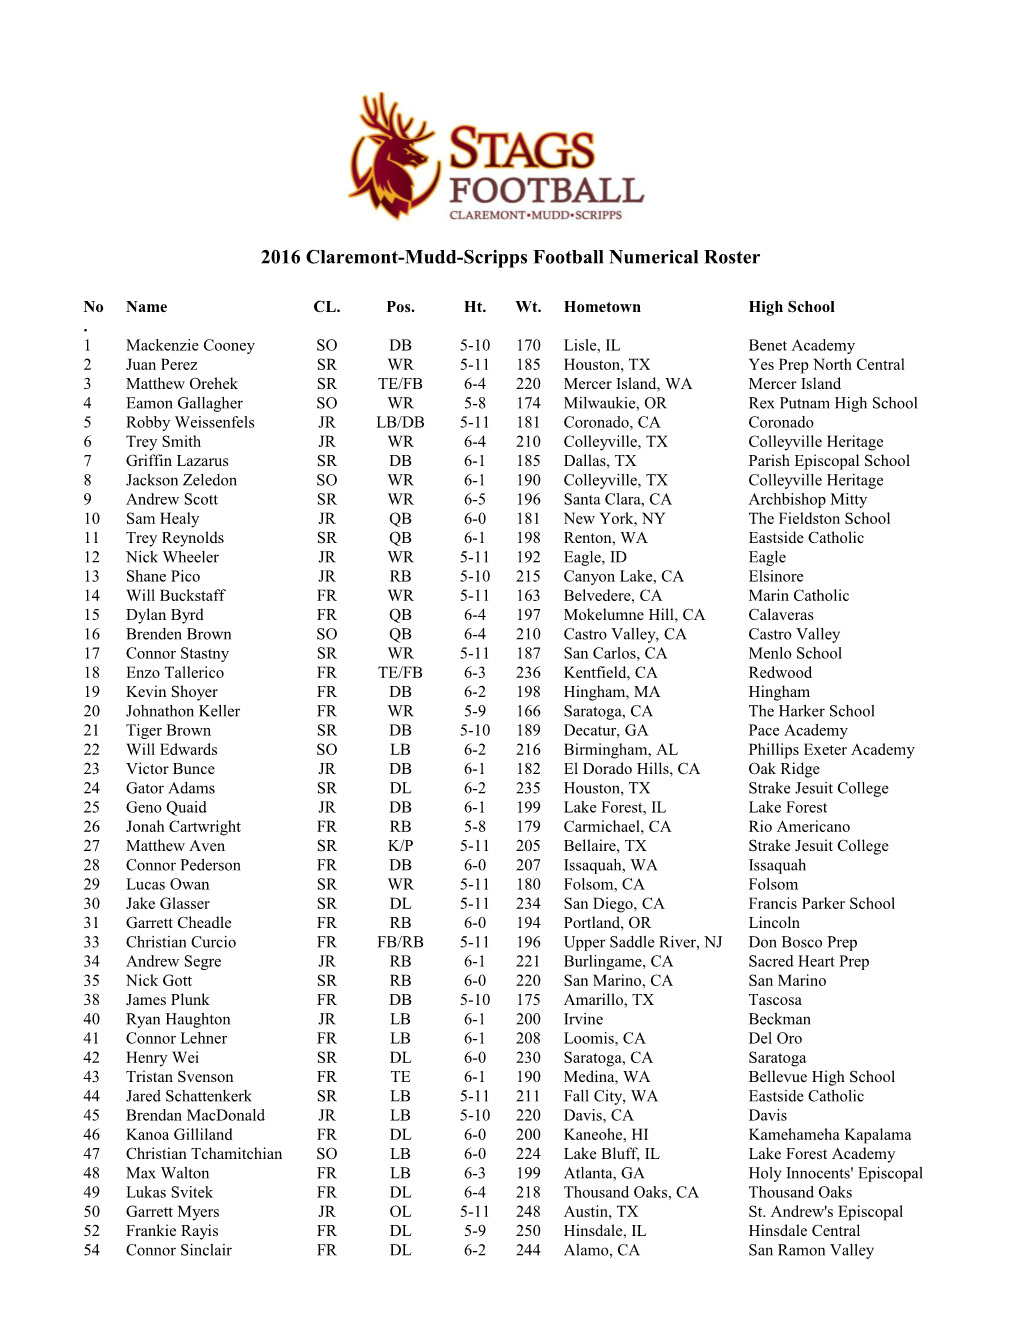 2008 CMS Football Roster